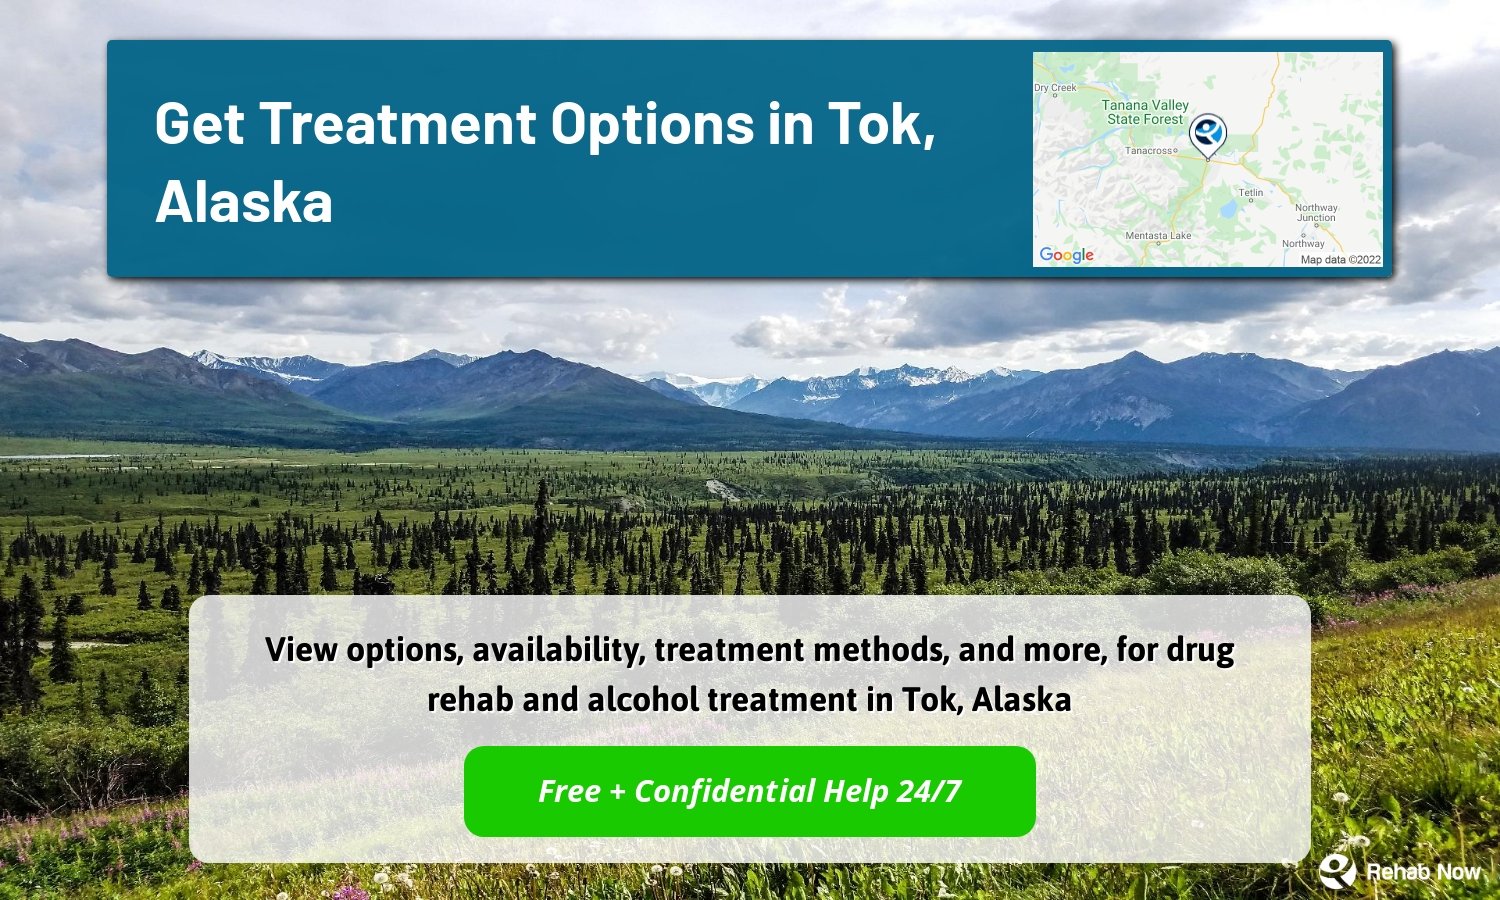 View options, availability, treatment methods, and more, for drug rehab and alcohol treatment in Tok, Alaska